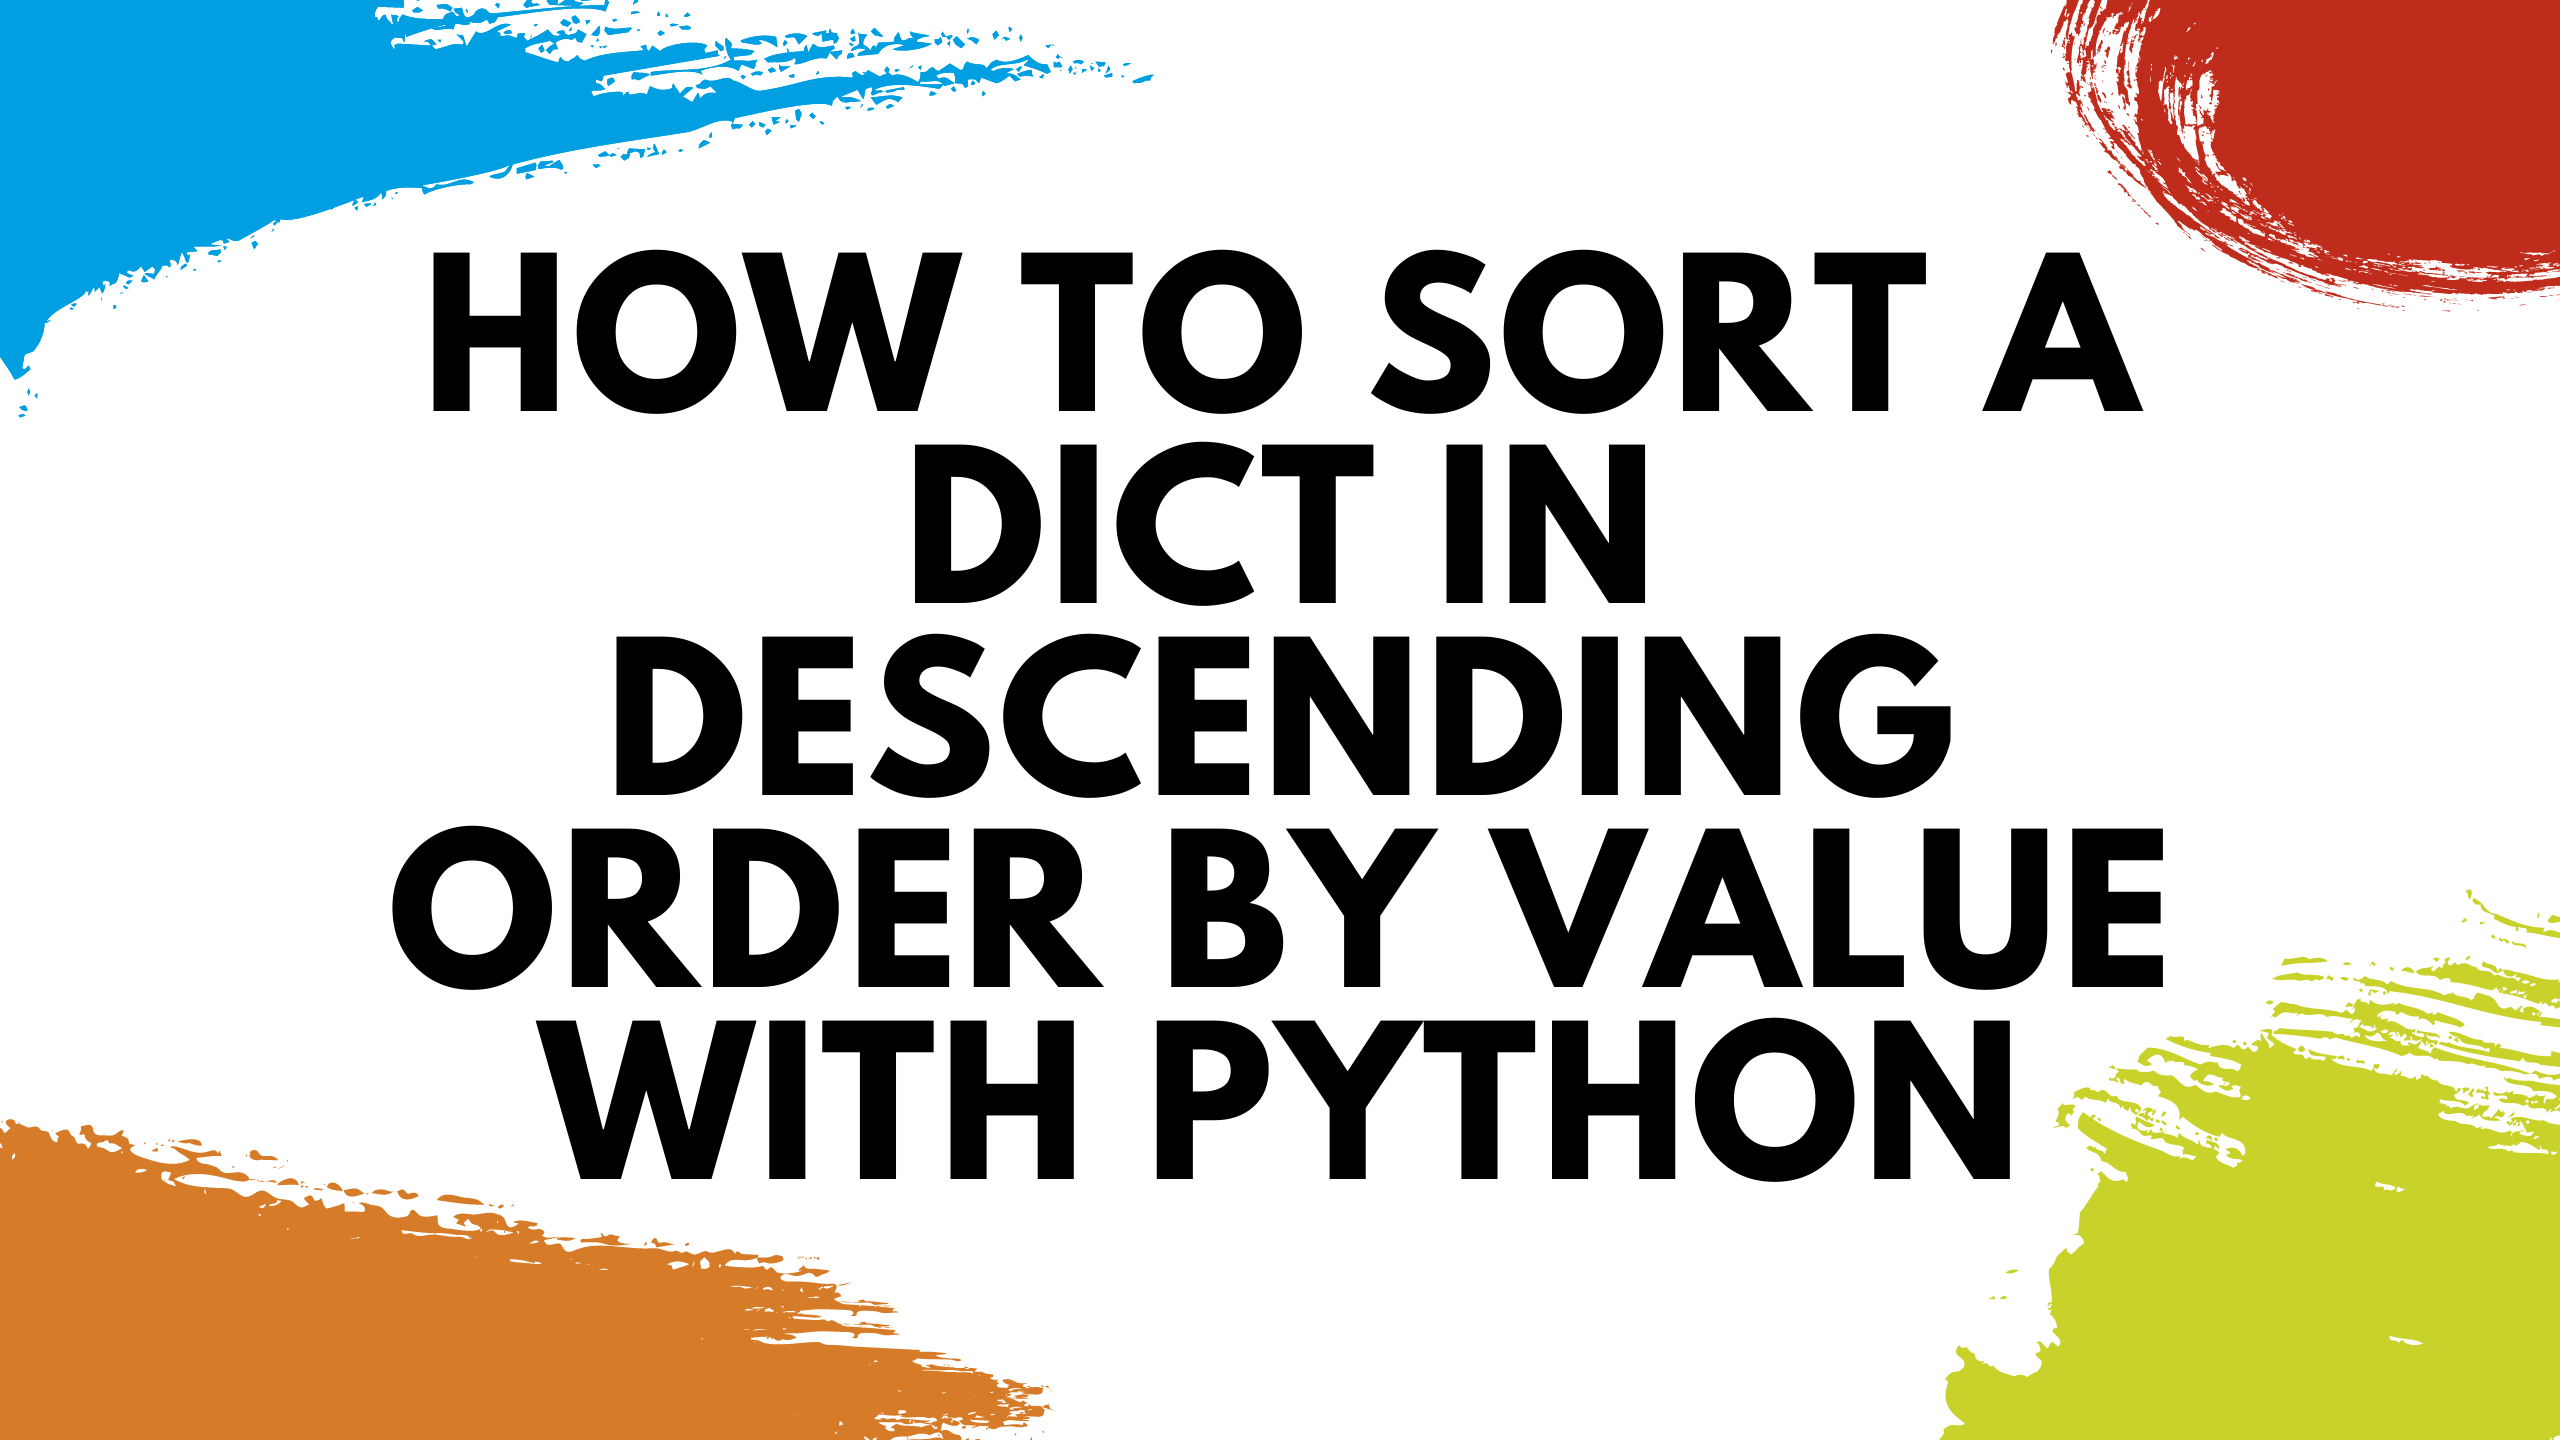 Python: How To Sort A Dictionary By Value In Descending Order